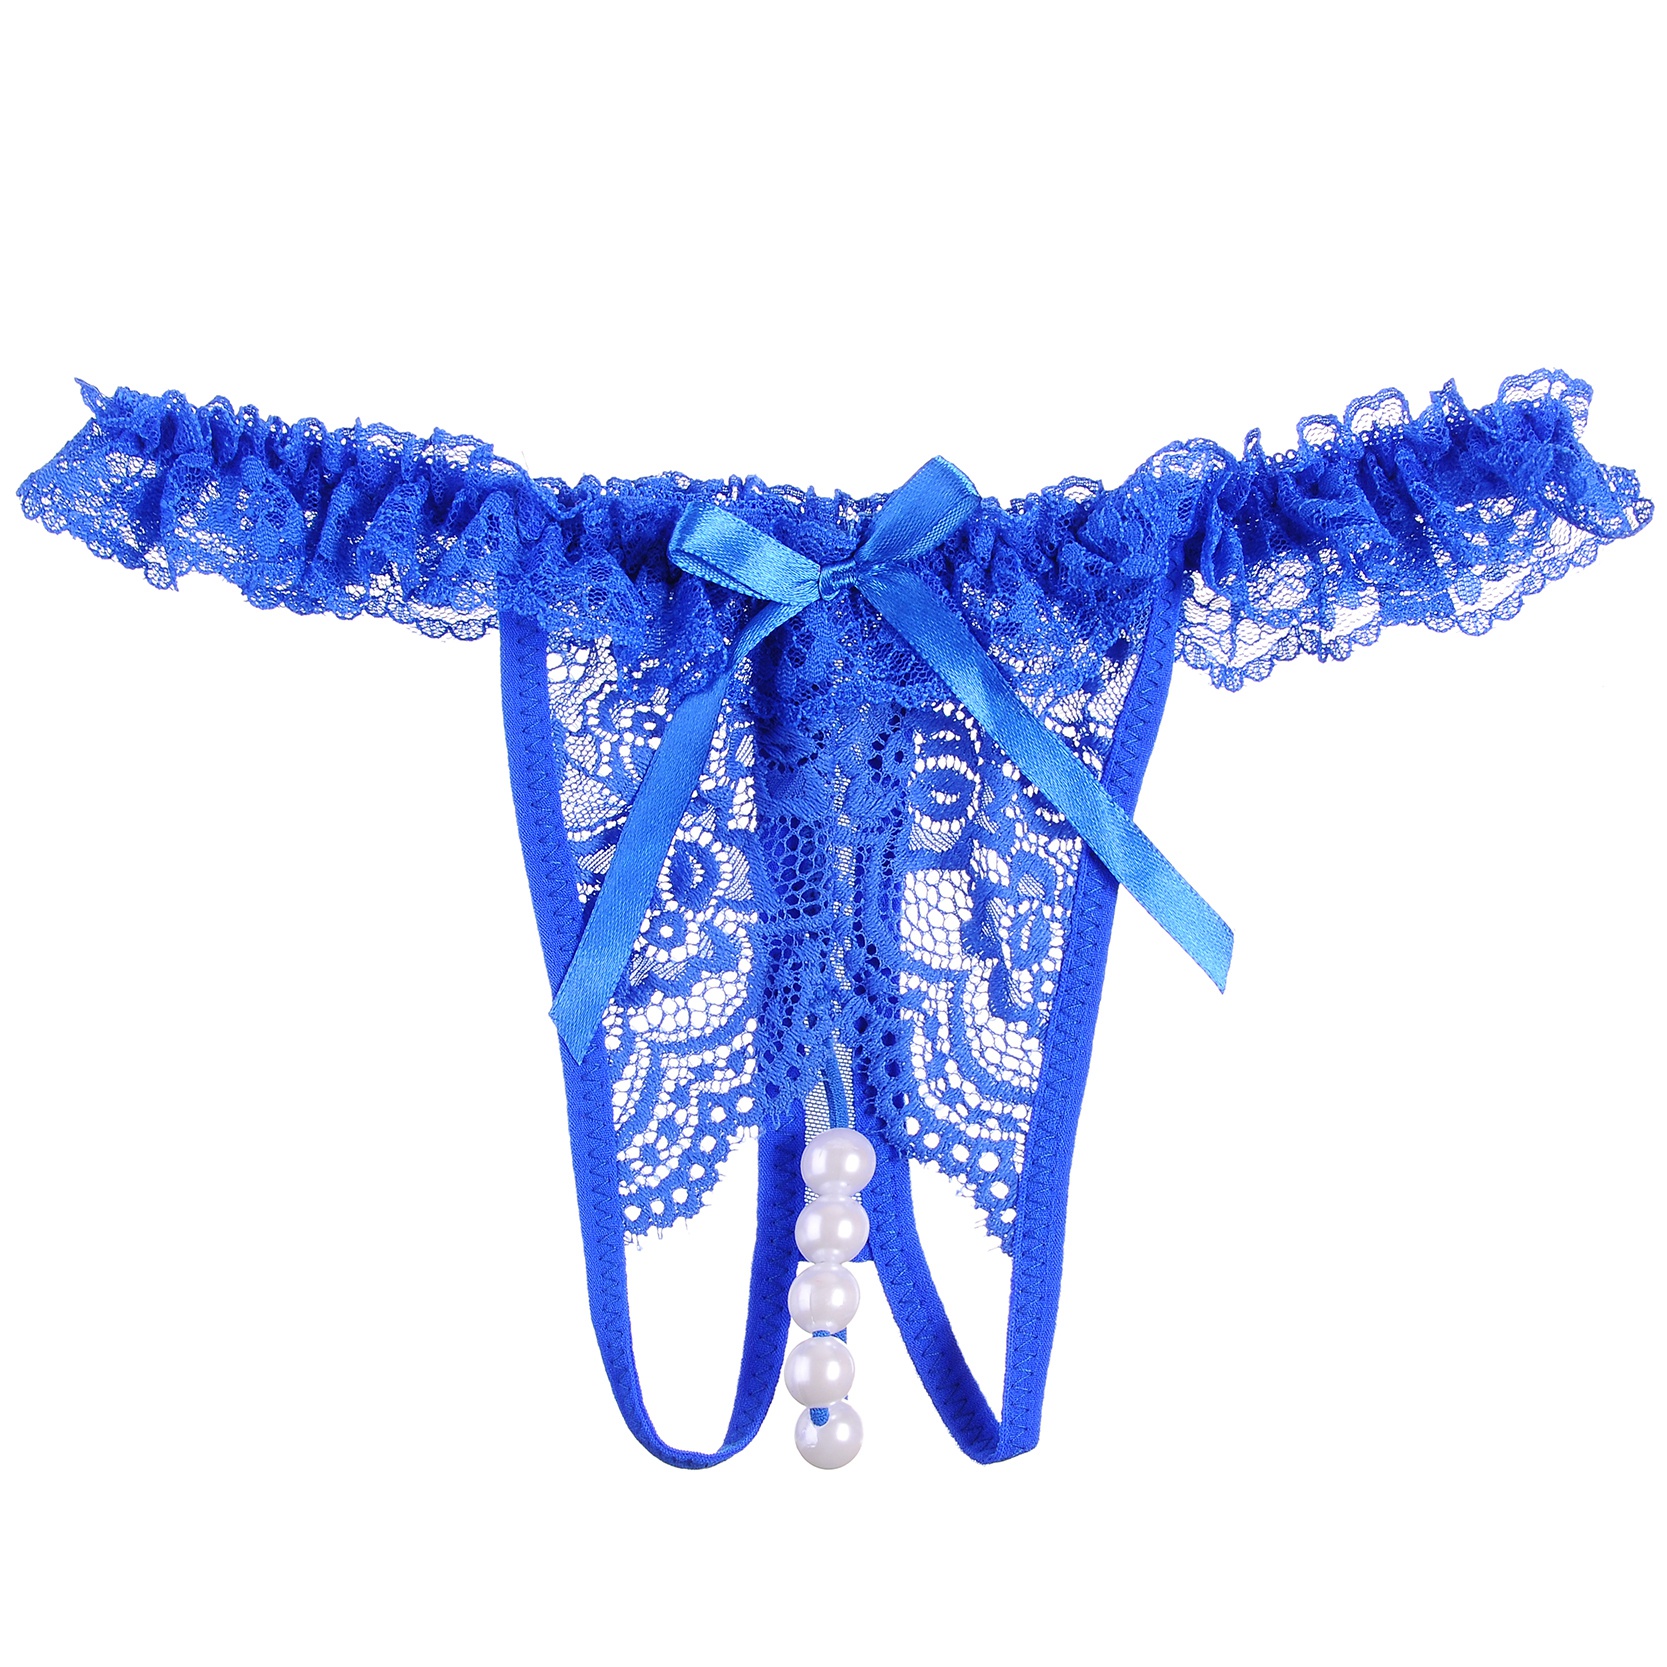 Online Buy Wholesale Crotchless Panties From China Crotchless Panties 